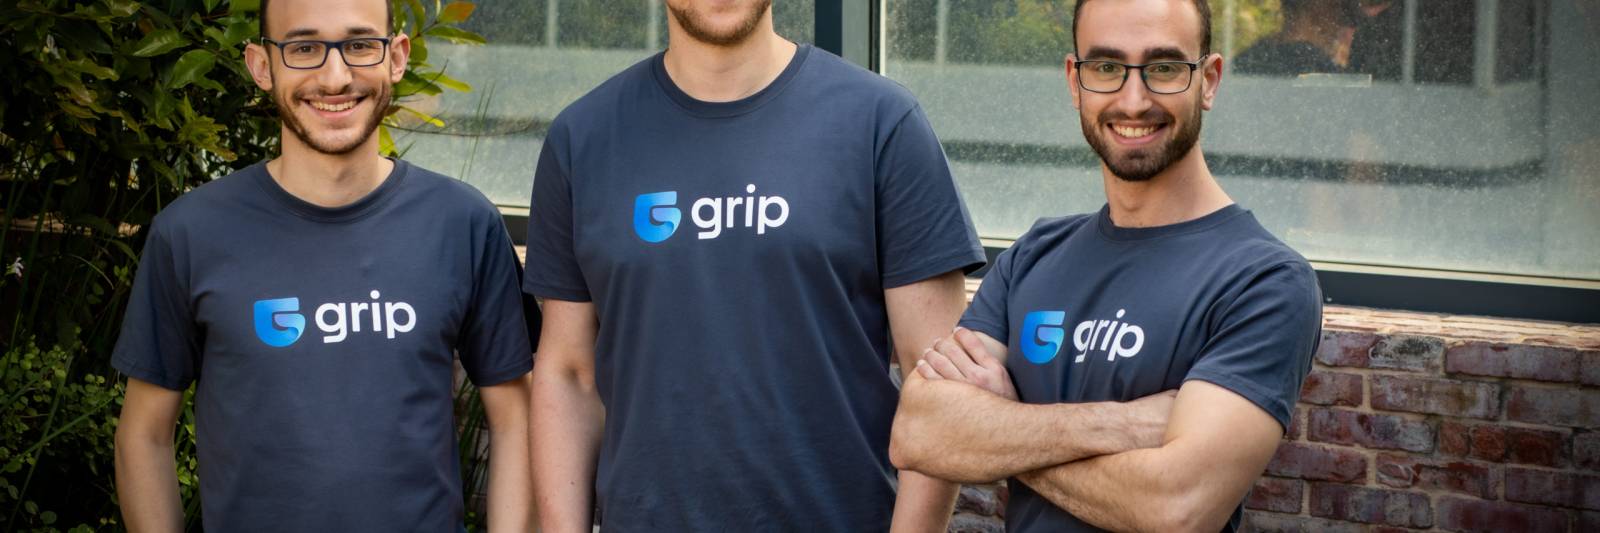 grip security grabs more cash to lead ‘gold rush’ to